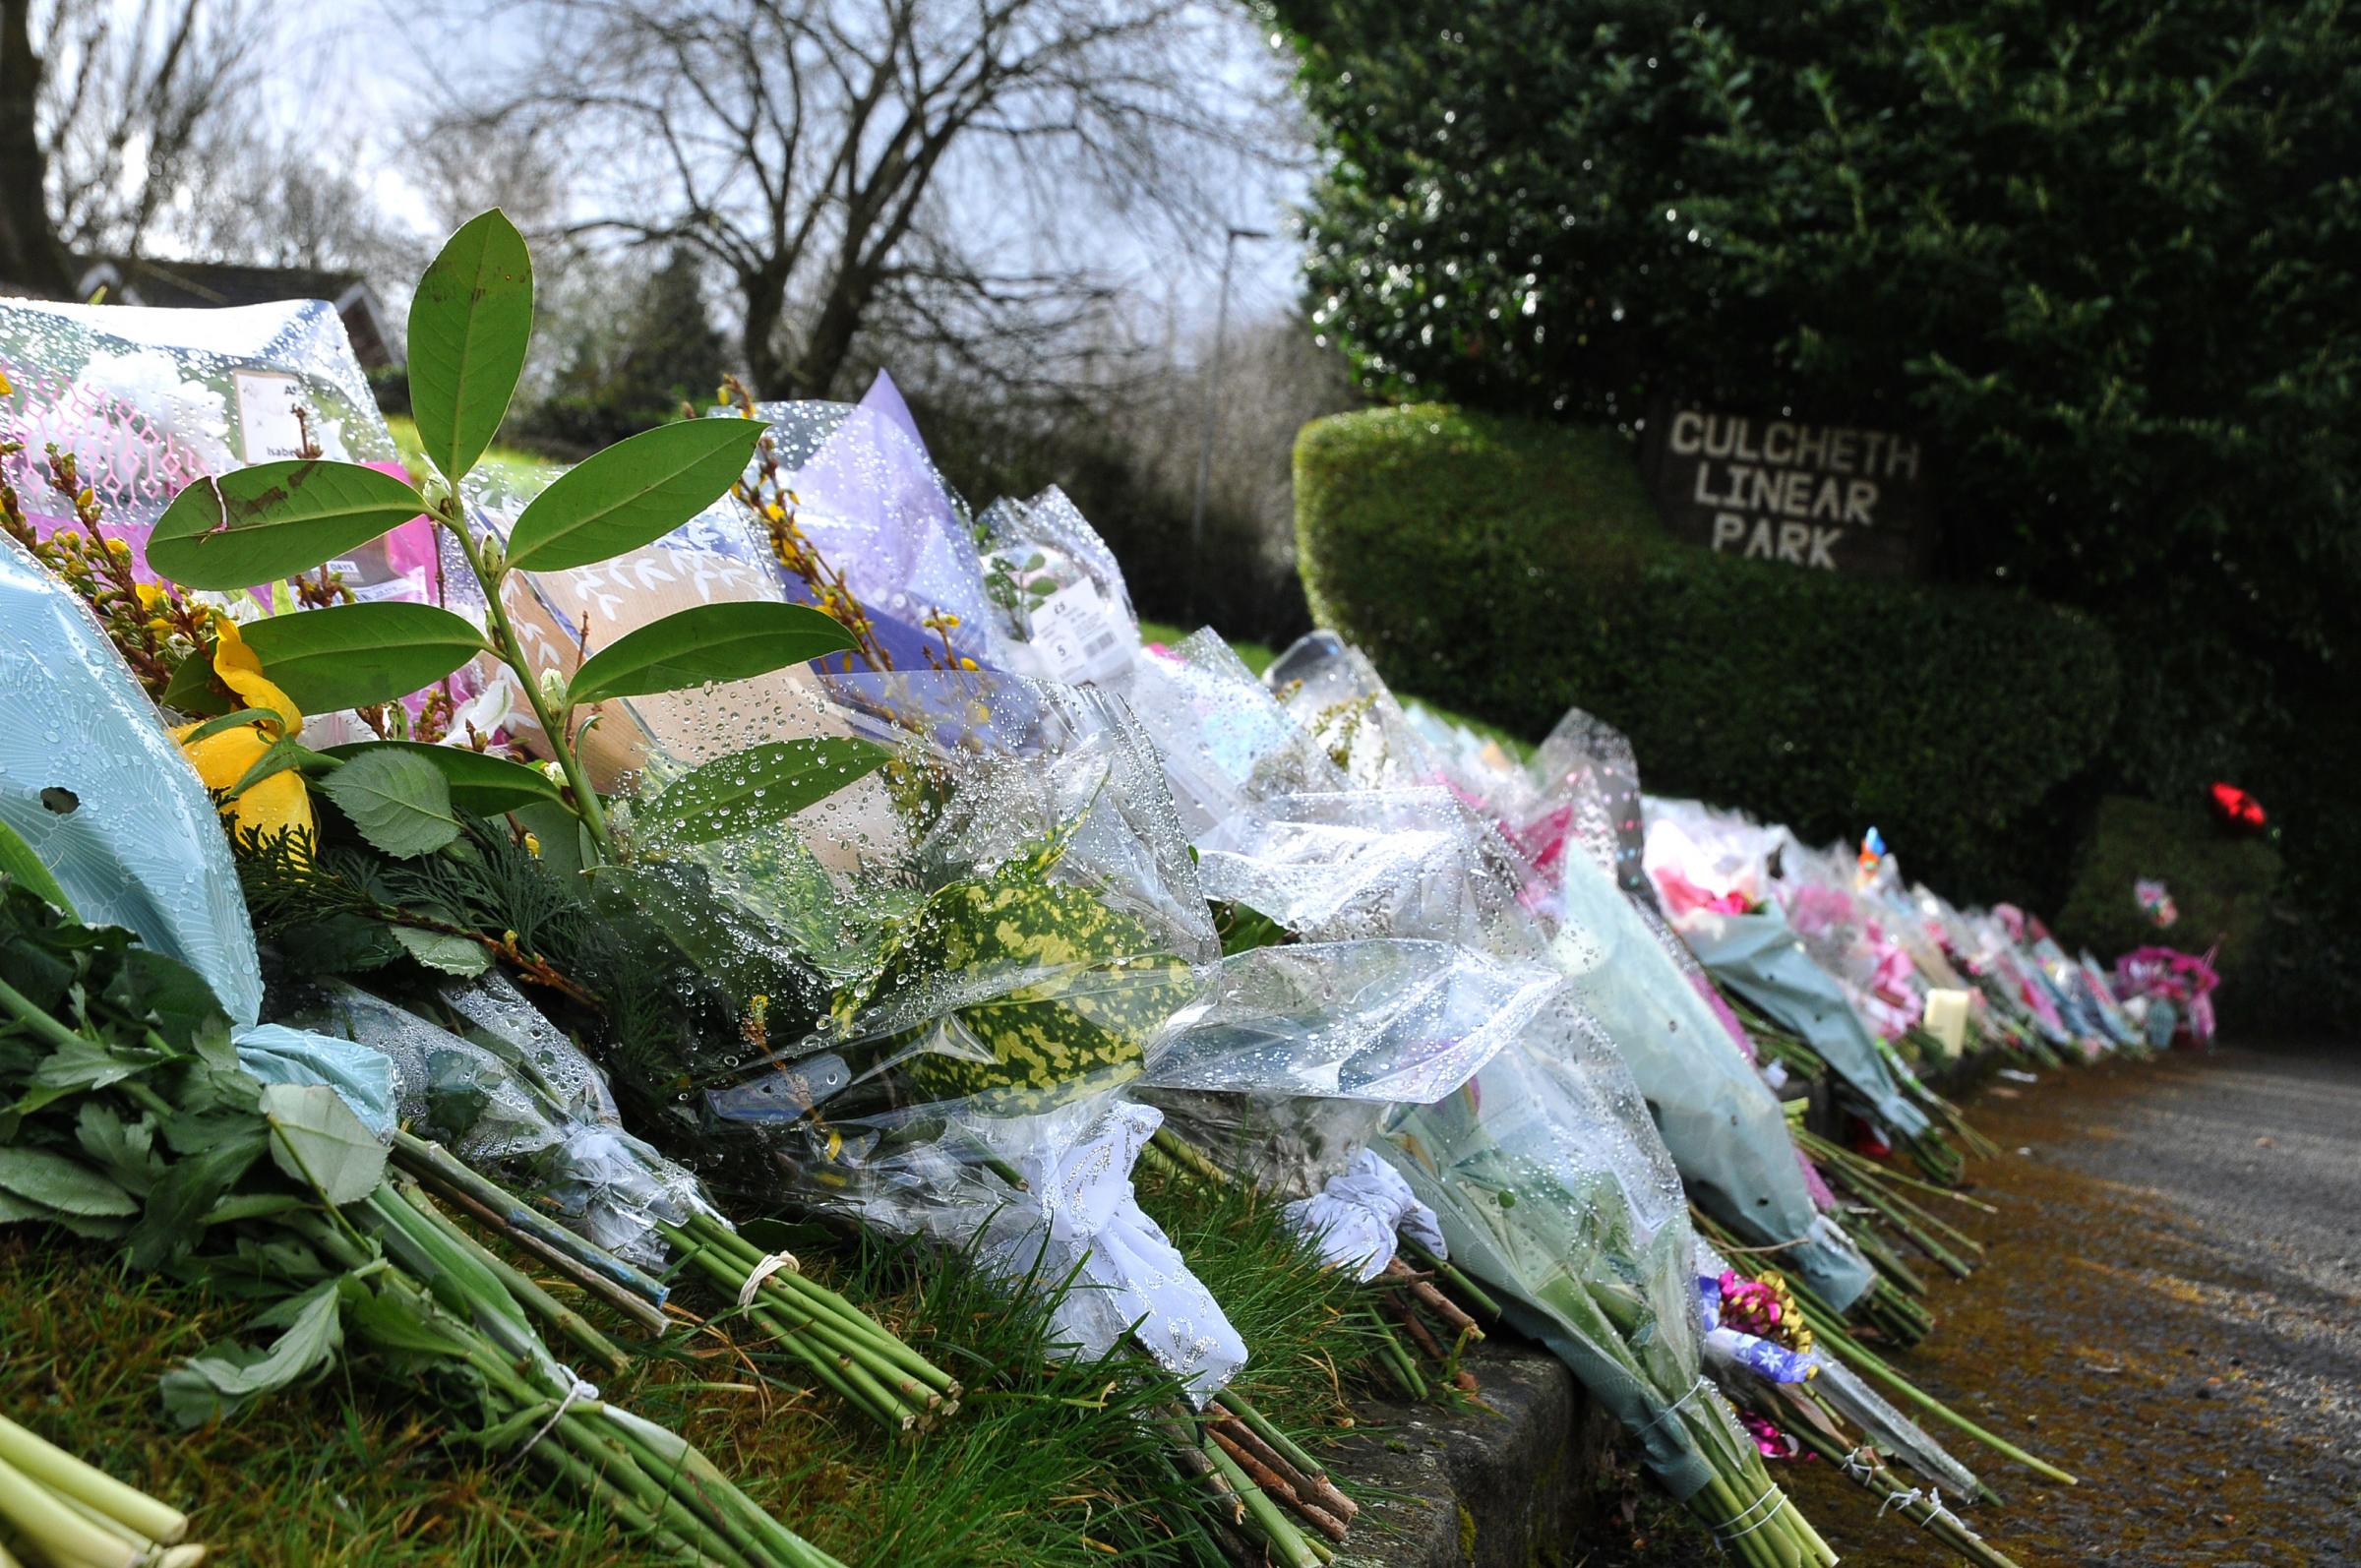 Floral tributes to Brianna were laid at Culcheth Linear Park in February